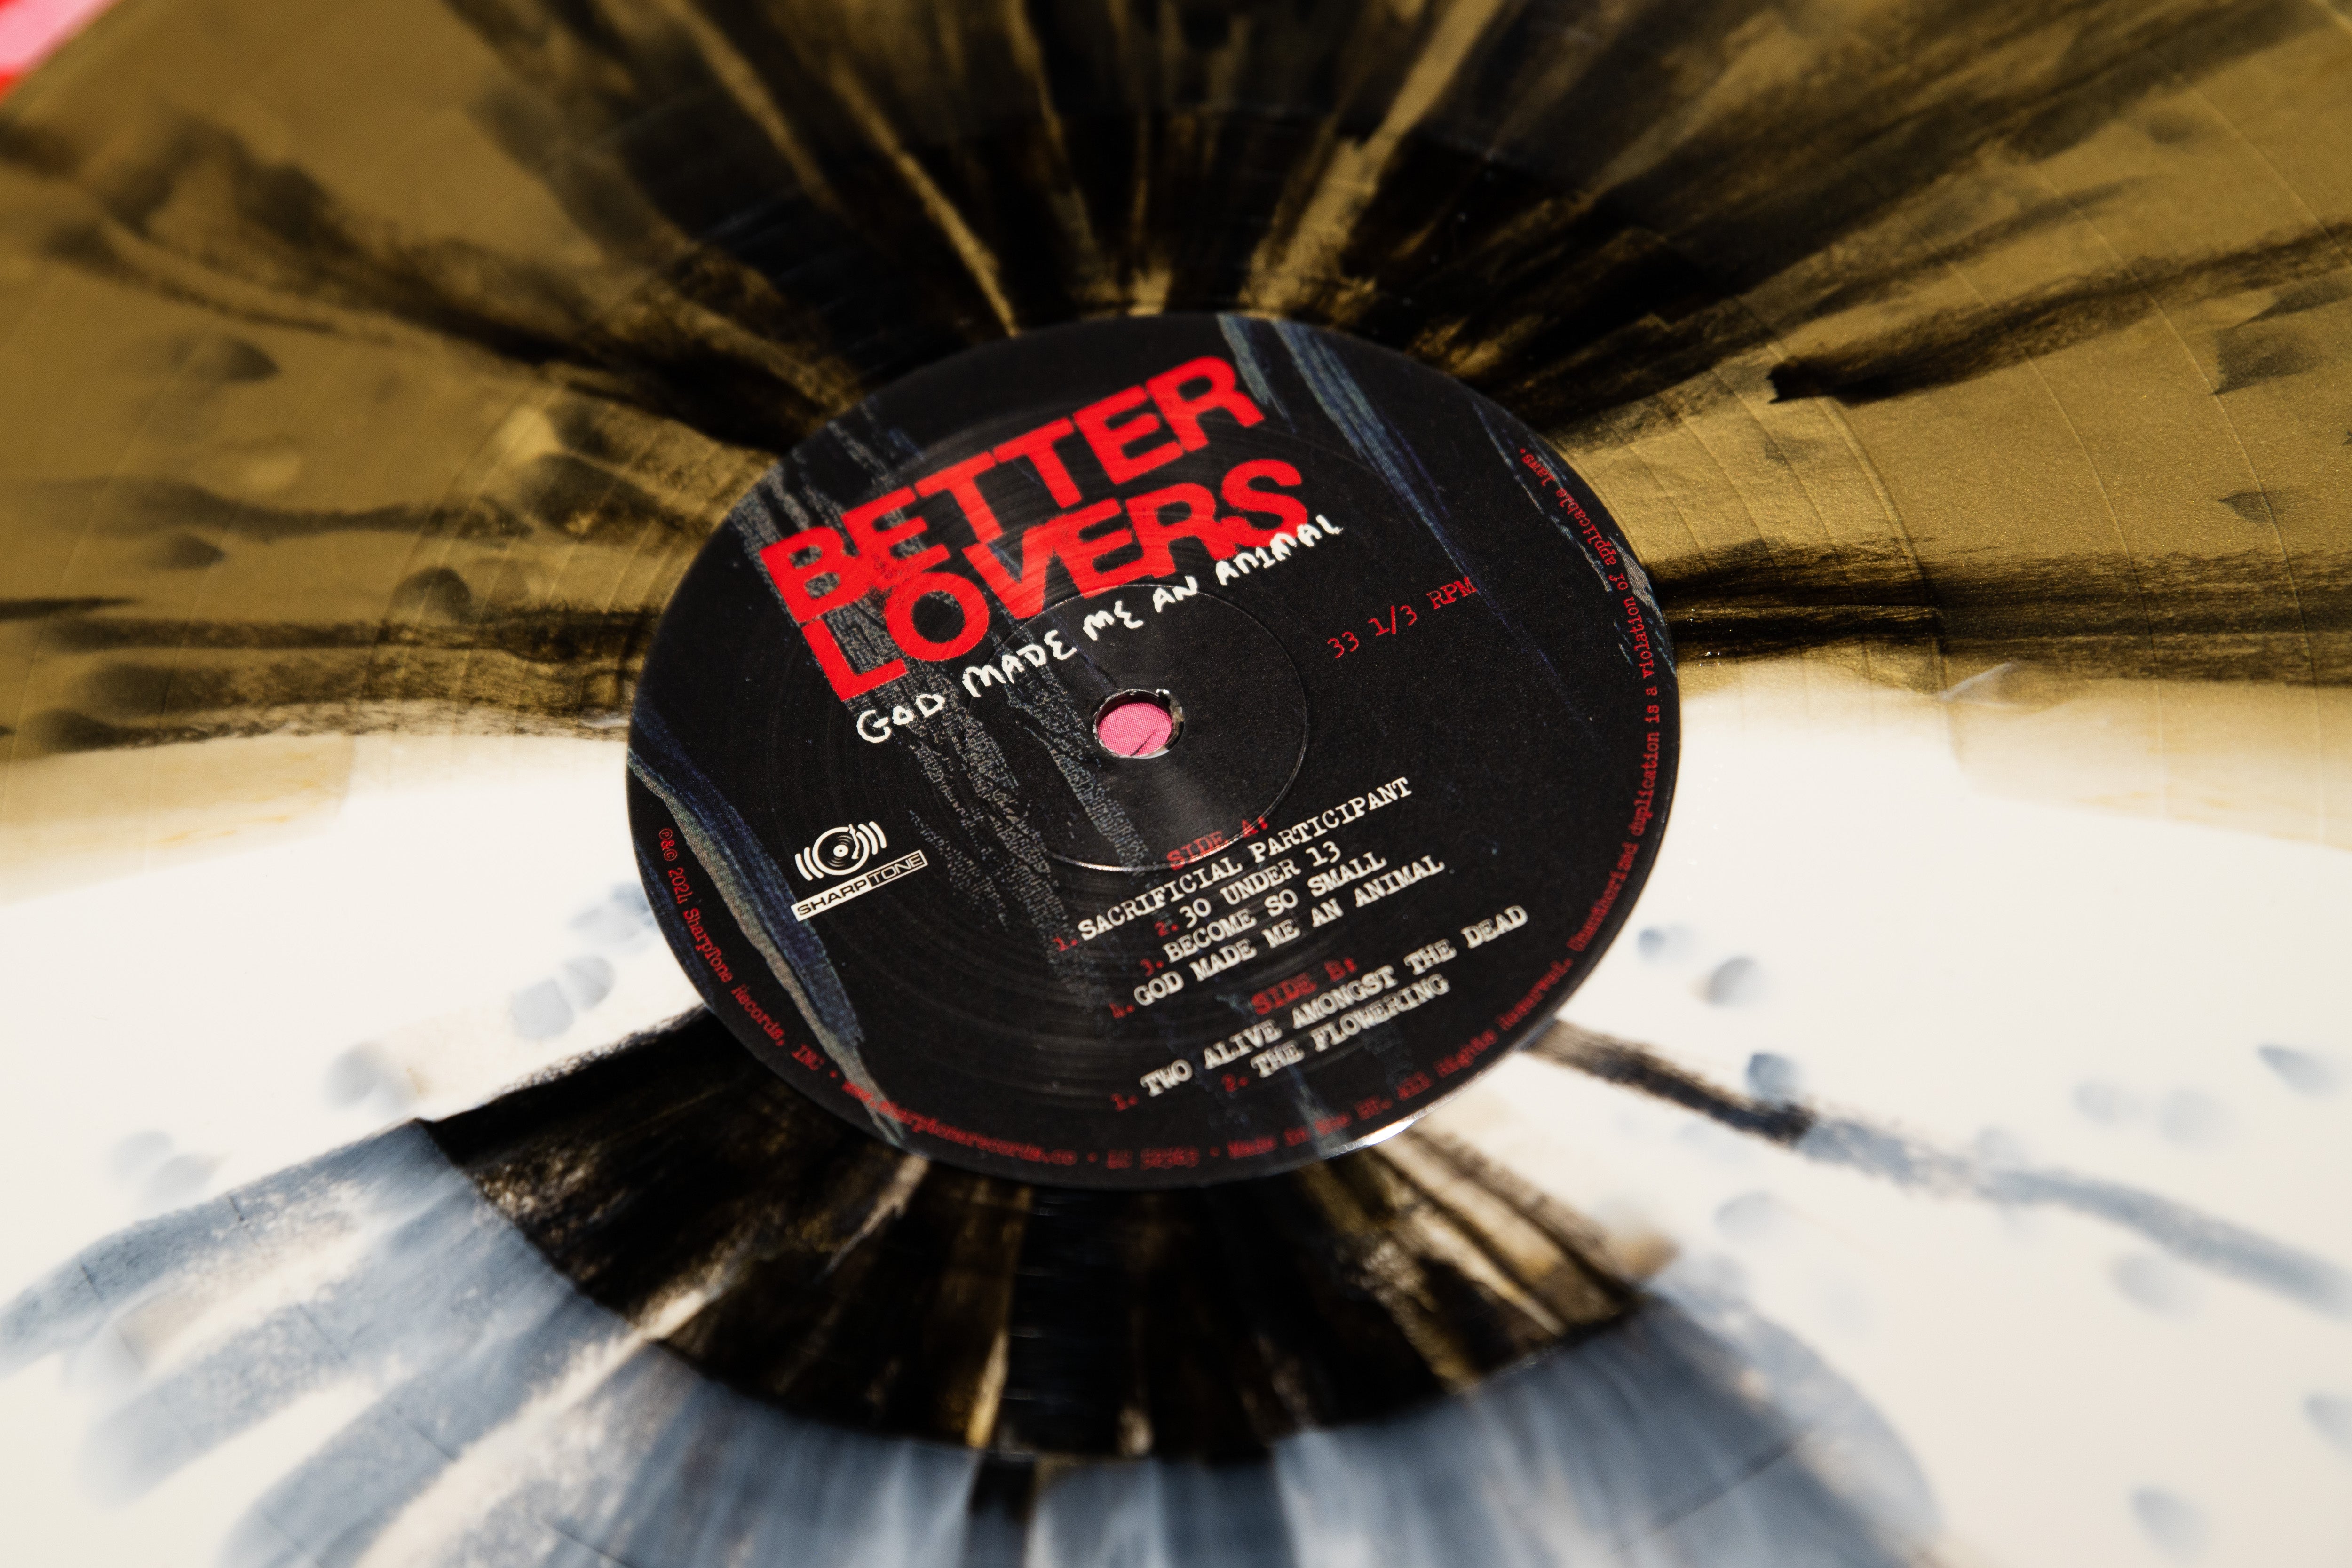 Better Lovers - God Made Me an Animal LP Anniversary Edition